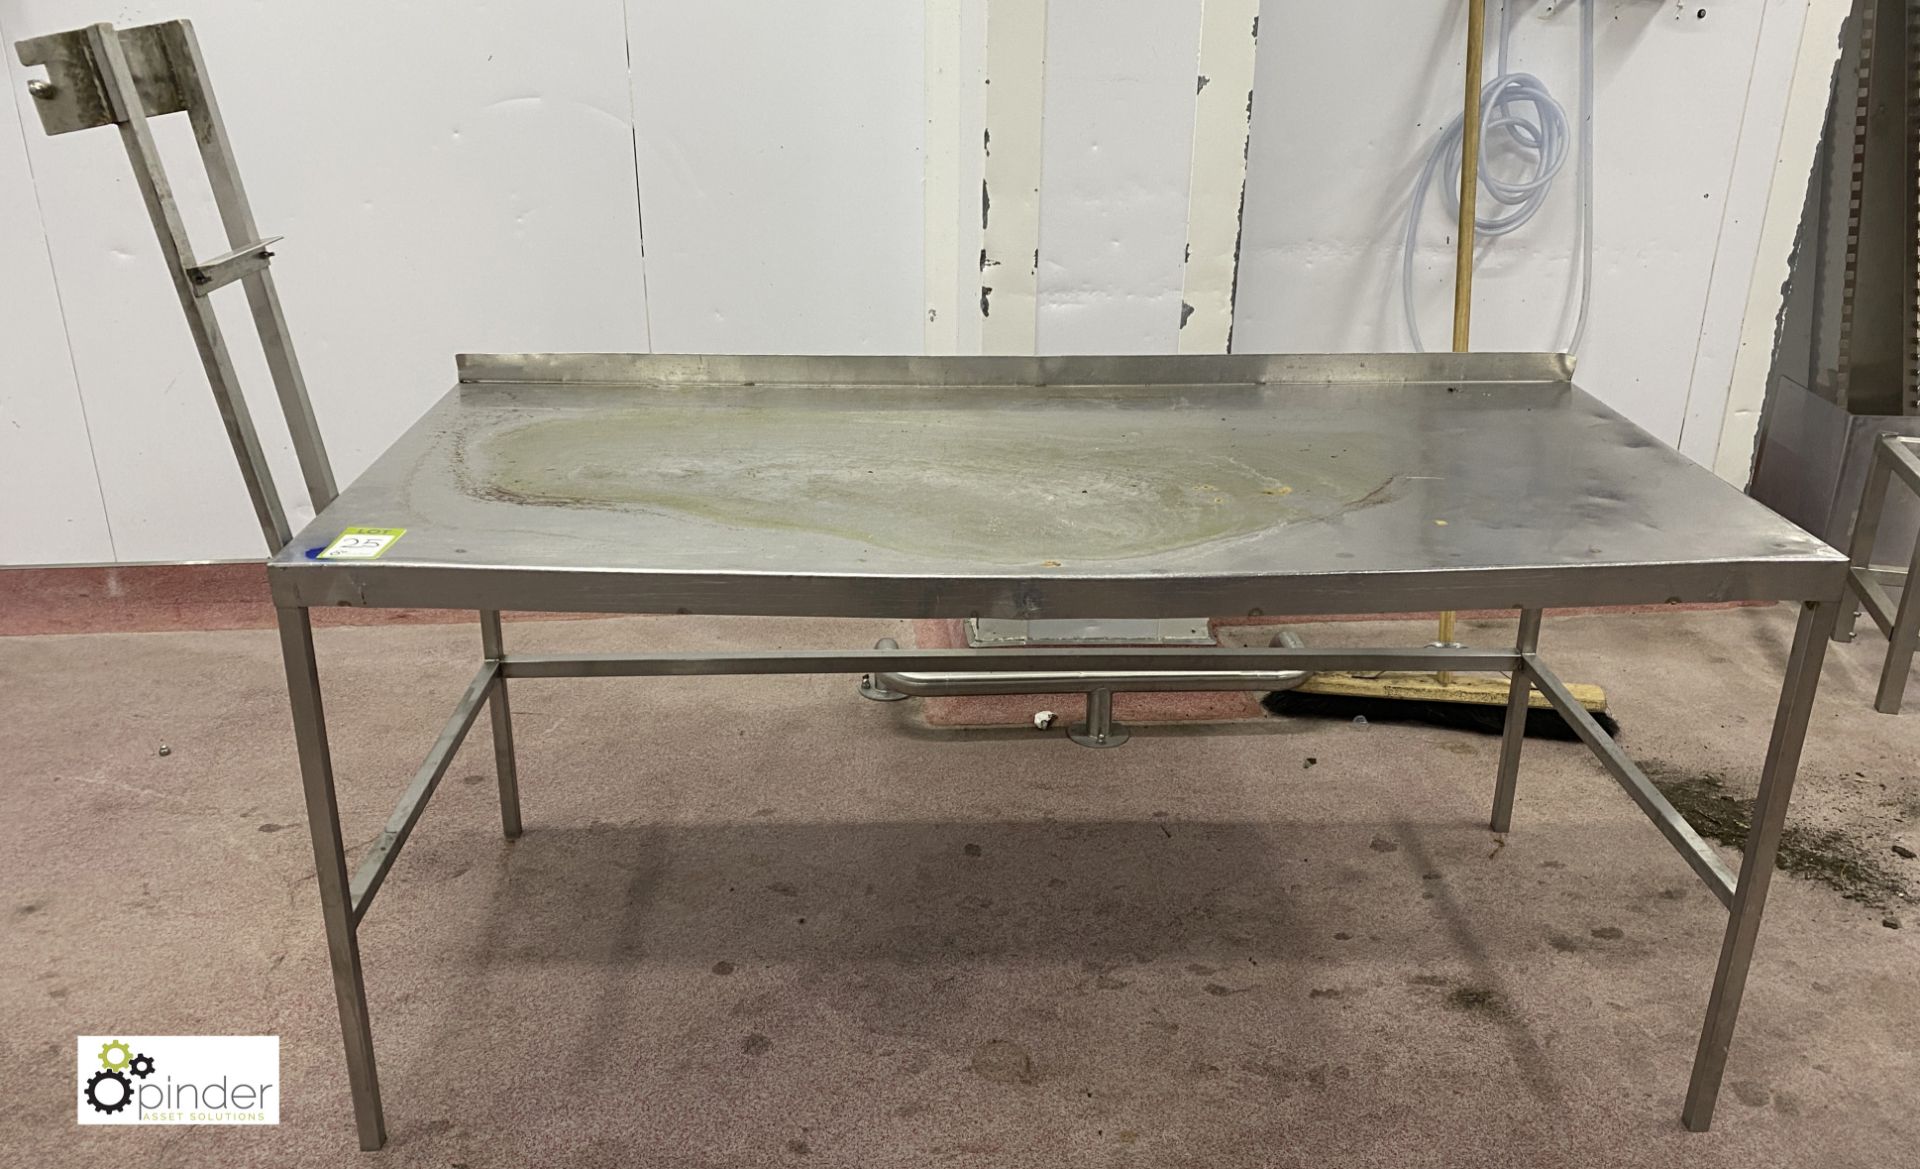 Stainless steel Preparation Table, 1720mm x 760mm x 790mm (please note there is a lift out fee of £5